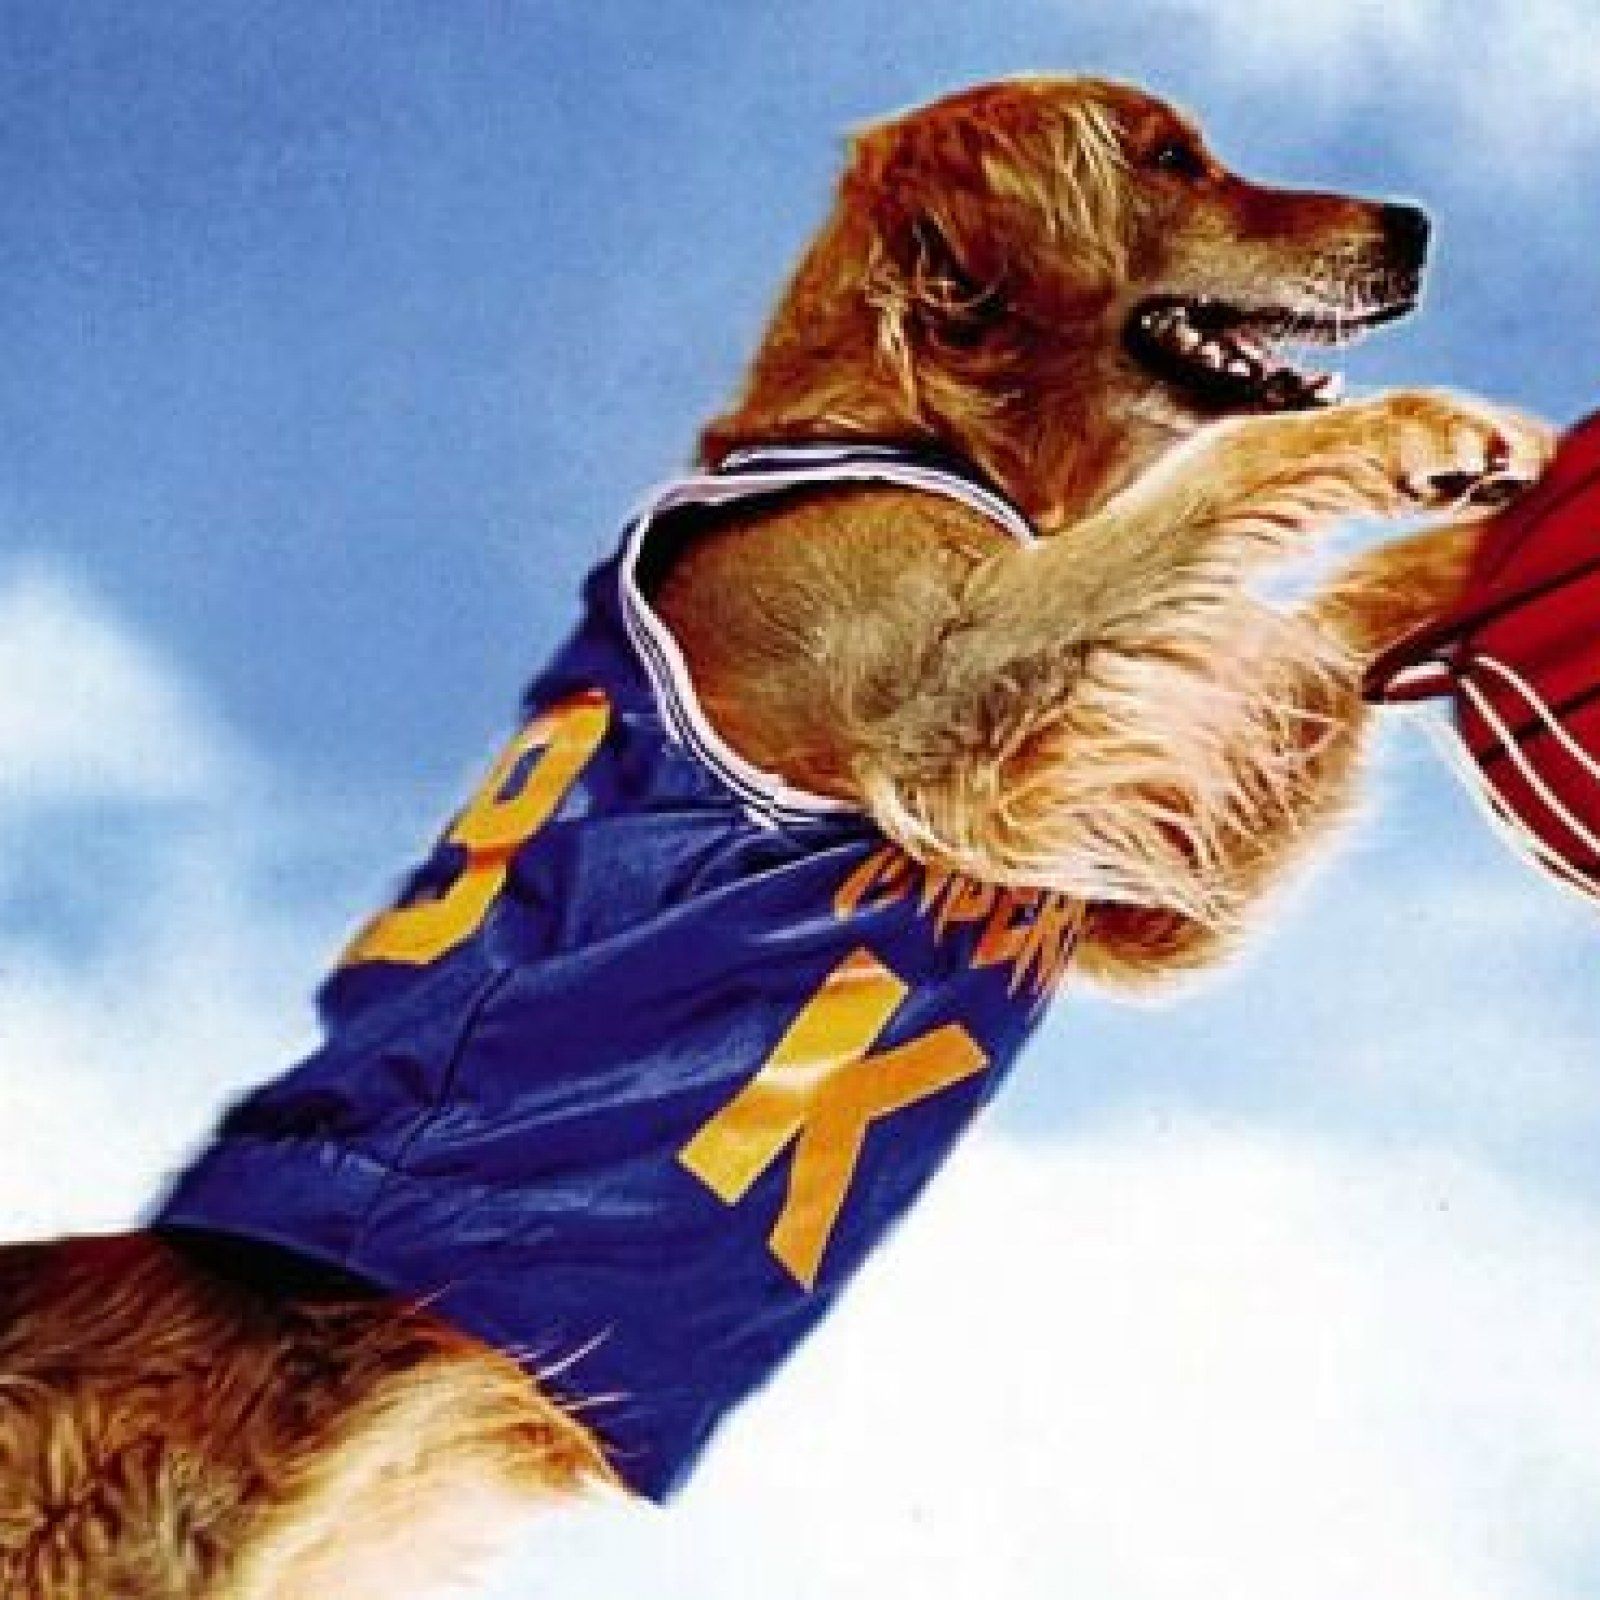 Air Bud' Came Out 20 Years Ago, So We Tracked Down the Director